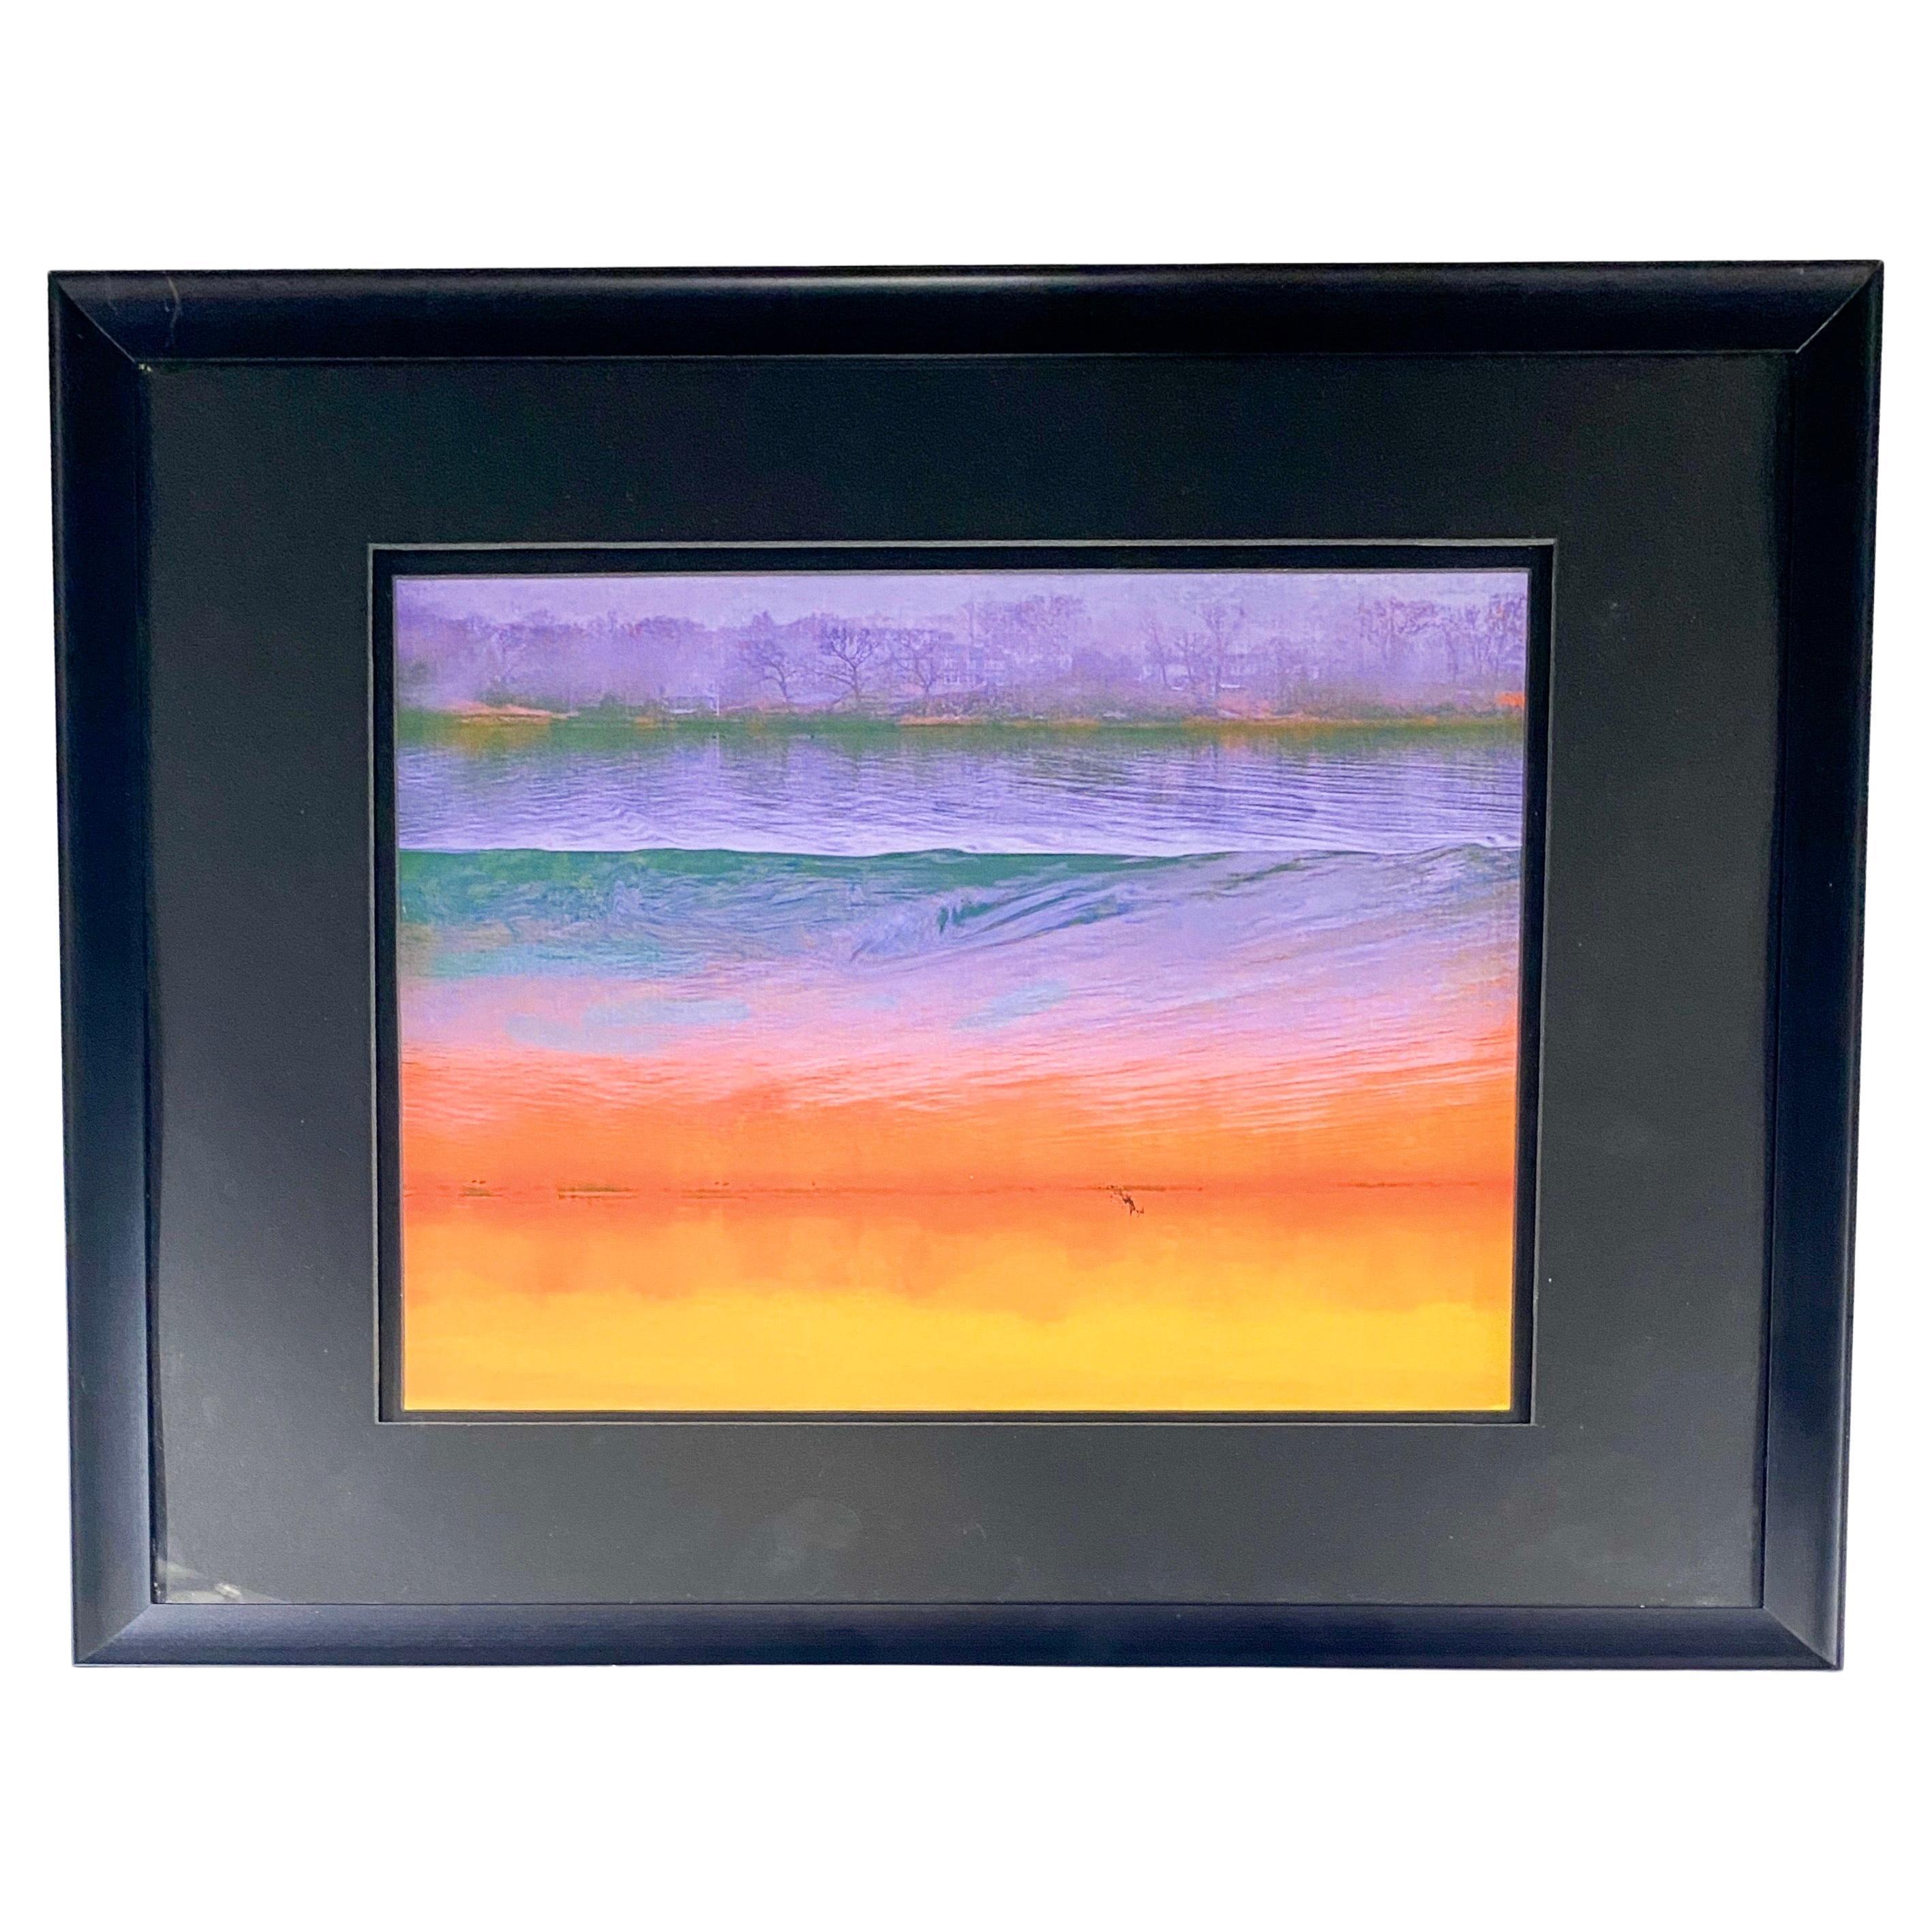 Marmalade Sky is a mixed media collage by contemporary artist Marc Vandermeer ( American, 1950's). The art work is mounted with Hahnemuhle paper, archival museum quality and to. 25 Dibond aluminum substrate. The mixed media arts or portrays a scene